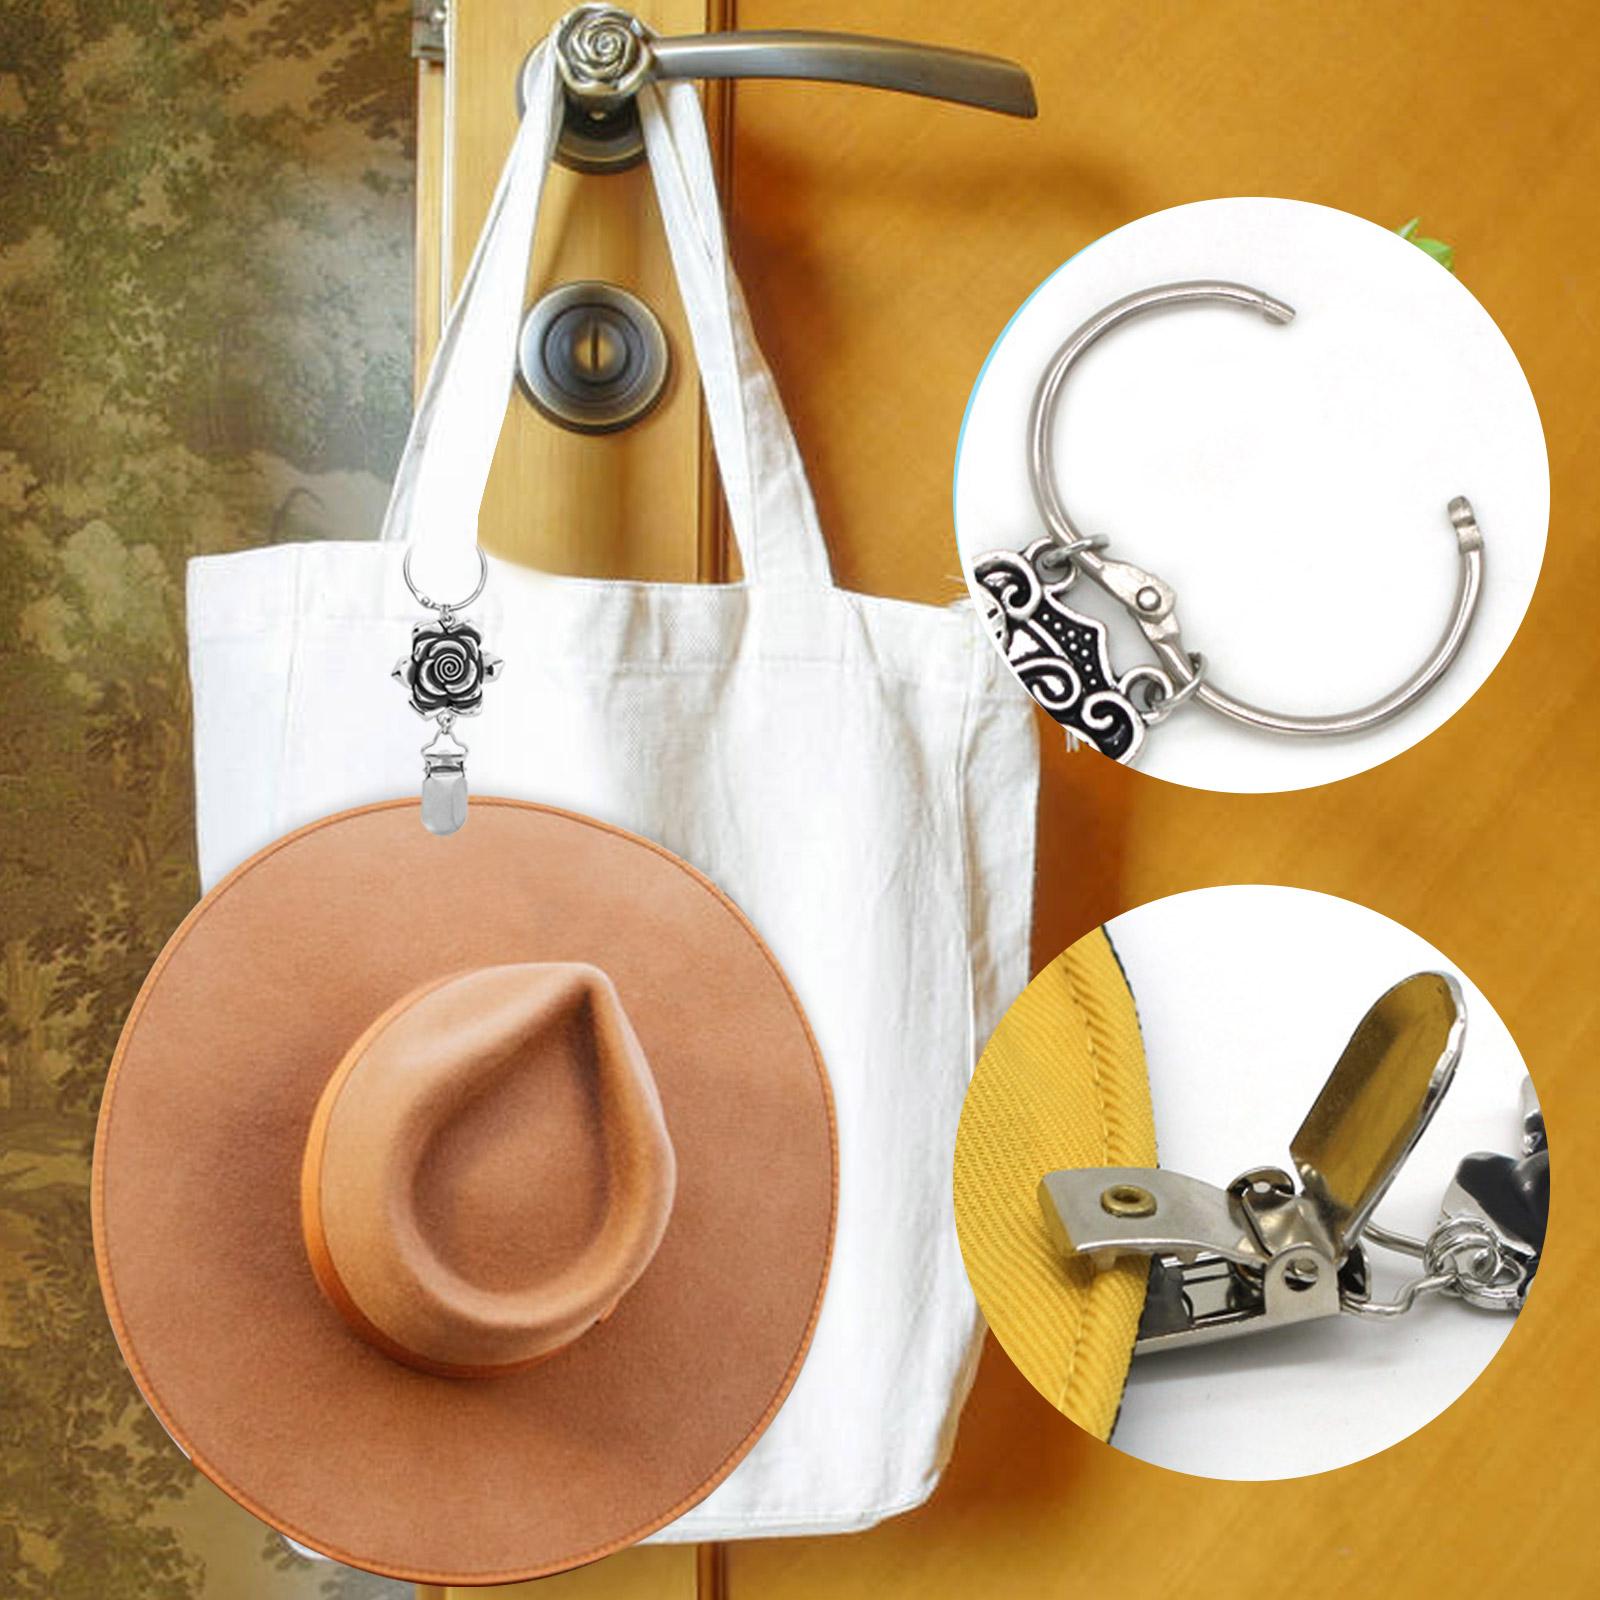 New Hat Clips For Bag Hat Holder For Travel Alloy Accessory Clip Outdoor U7U8 - image 4 of 9